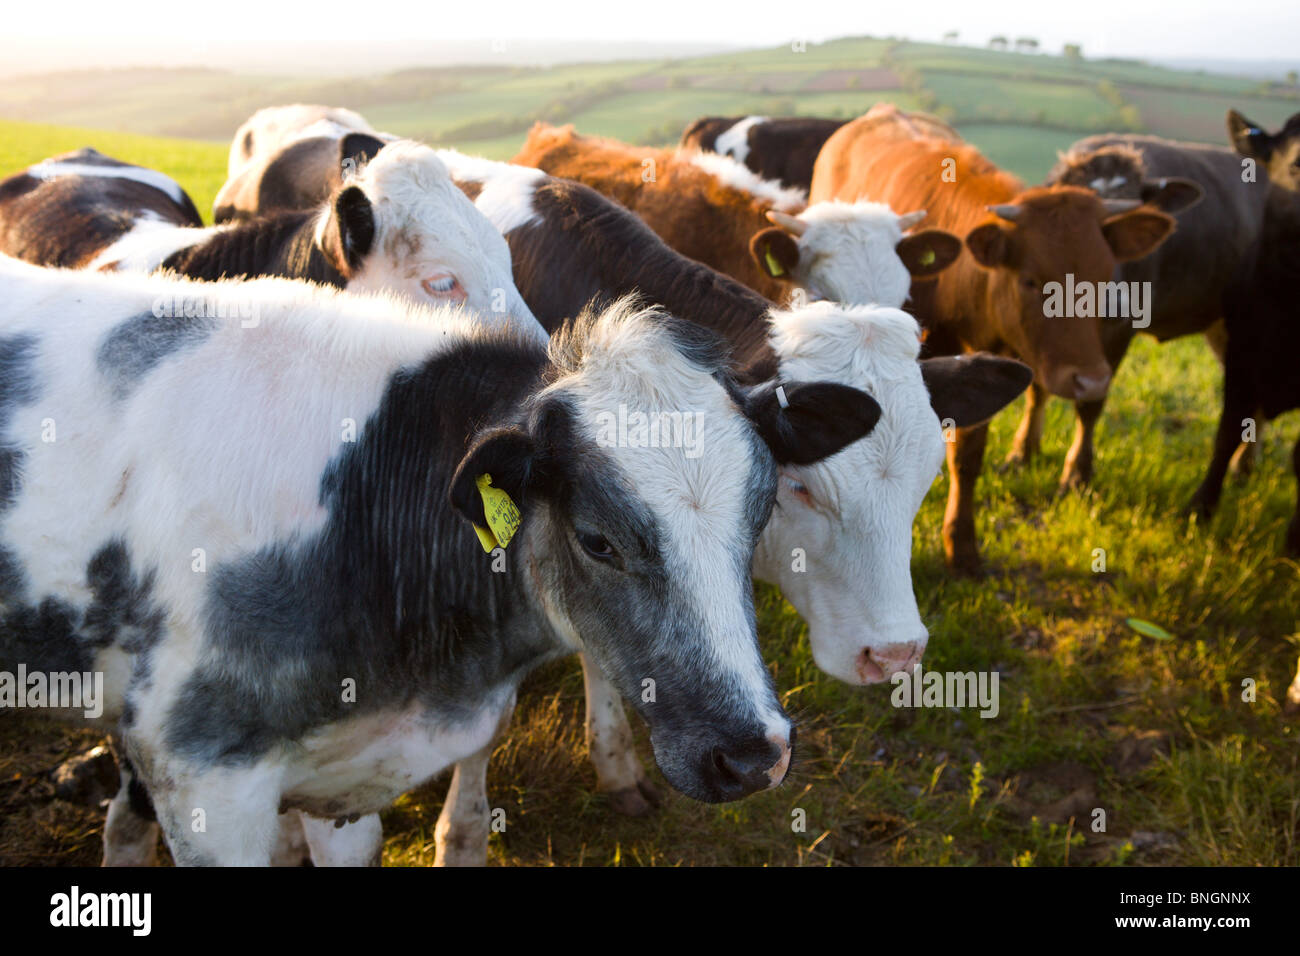 Curious Bullocks crowd together in a farmers field, Devon, England. Spring (May) 2009 Stock Photo